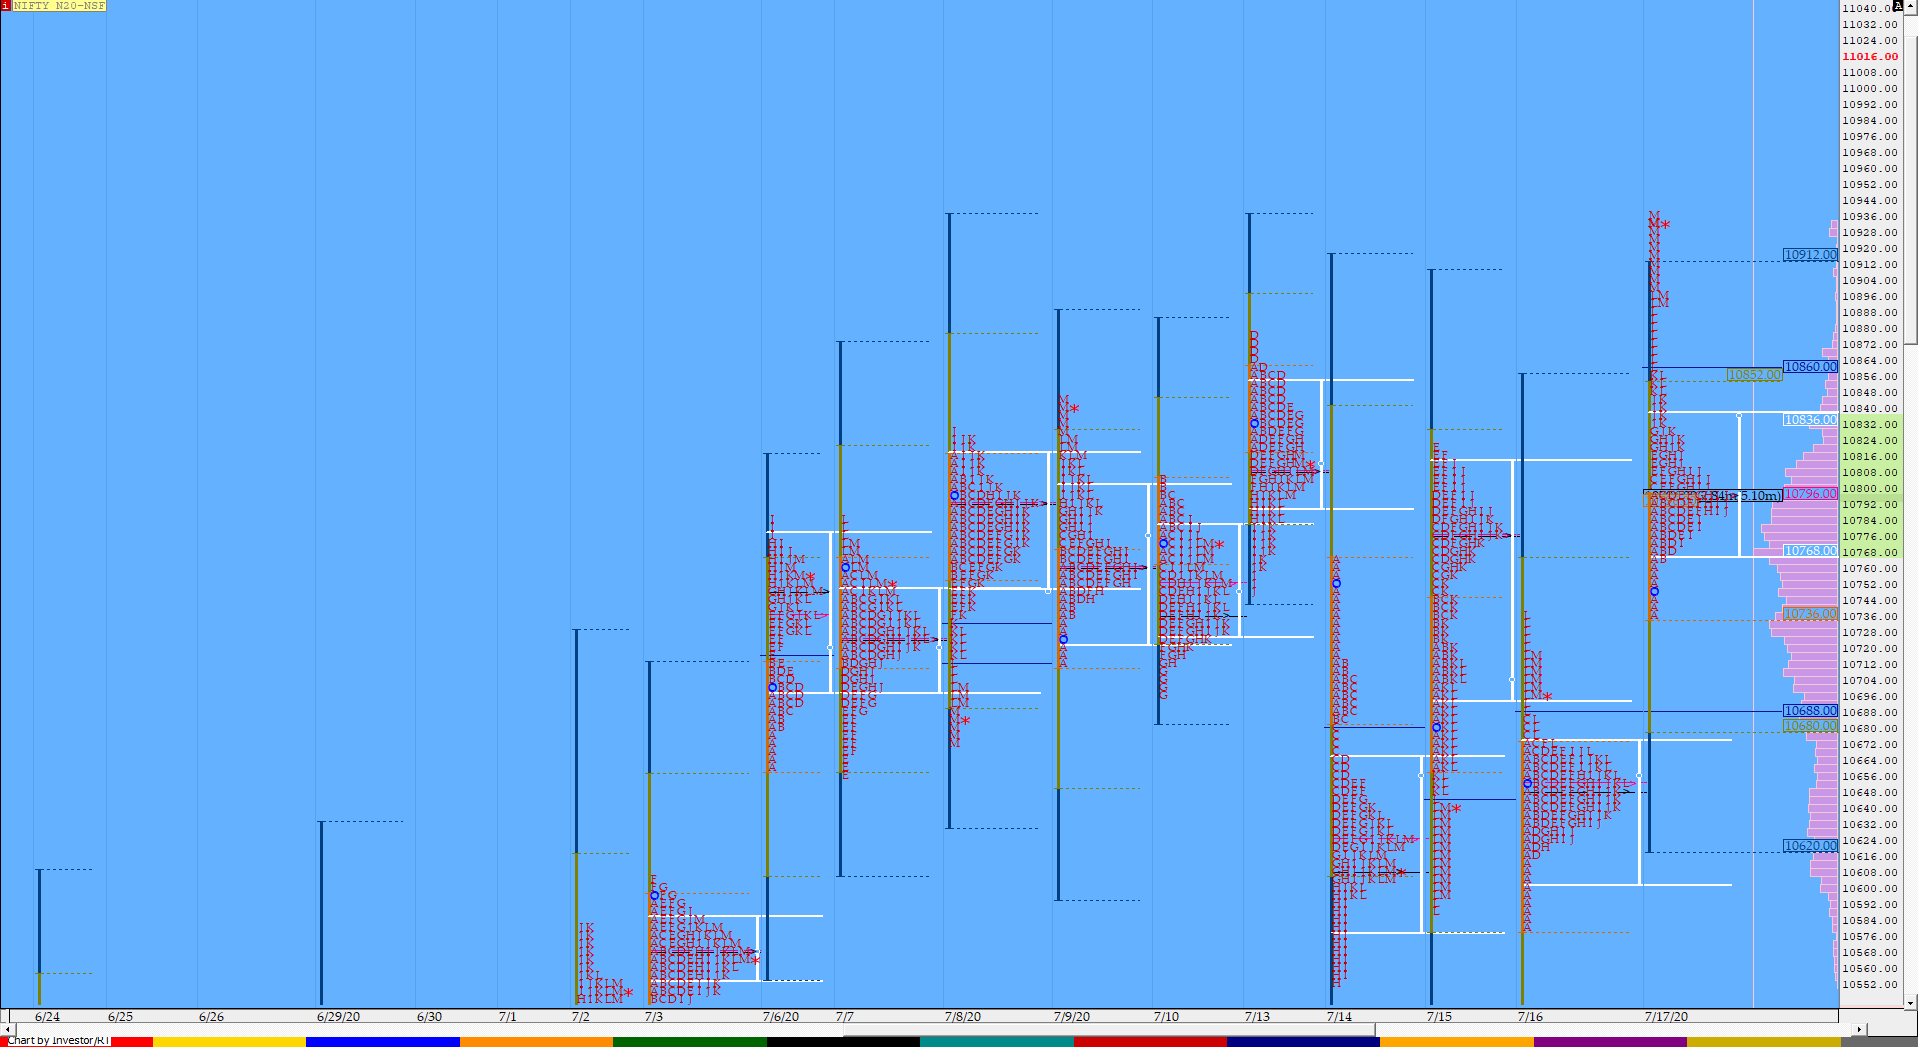 Nf Compo1 13 Market Profile Analysis Dated 17Th July 2020 Banknifty Futures, Charts, Day Trading, Intraday Trading, Intraday Trading Strategies, Market Profile, Market Profile Trading Strategies, Nifty Futures, Order Flow Analysis, Support And Resistance, Technical Analysis, Trading Strategies, Volume Profile Trading